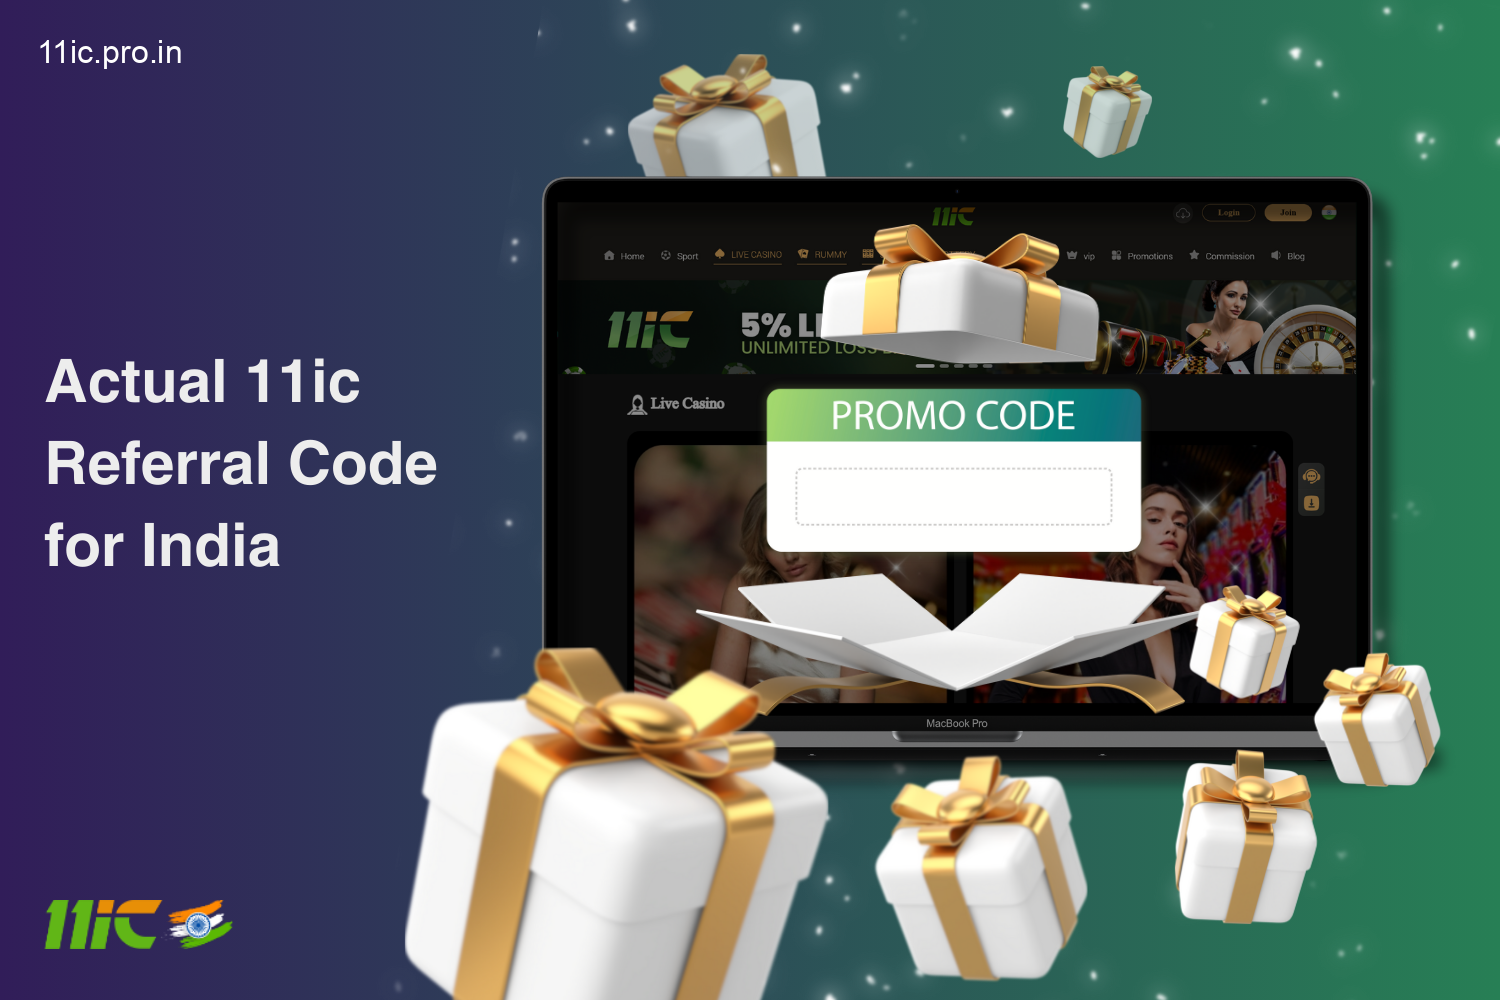 Actual promo code 11ic allows you to get additional bonus on registration